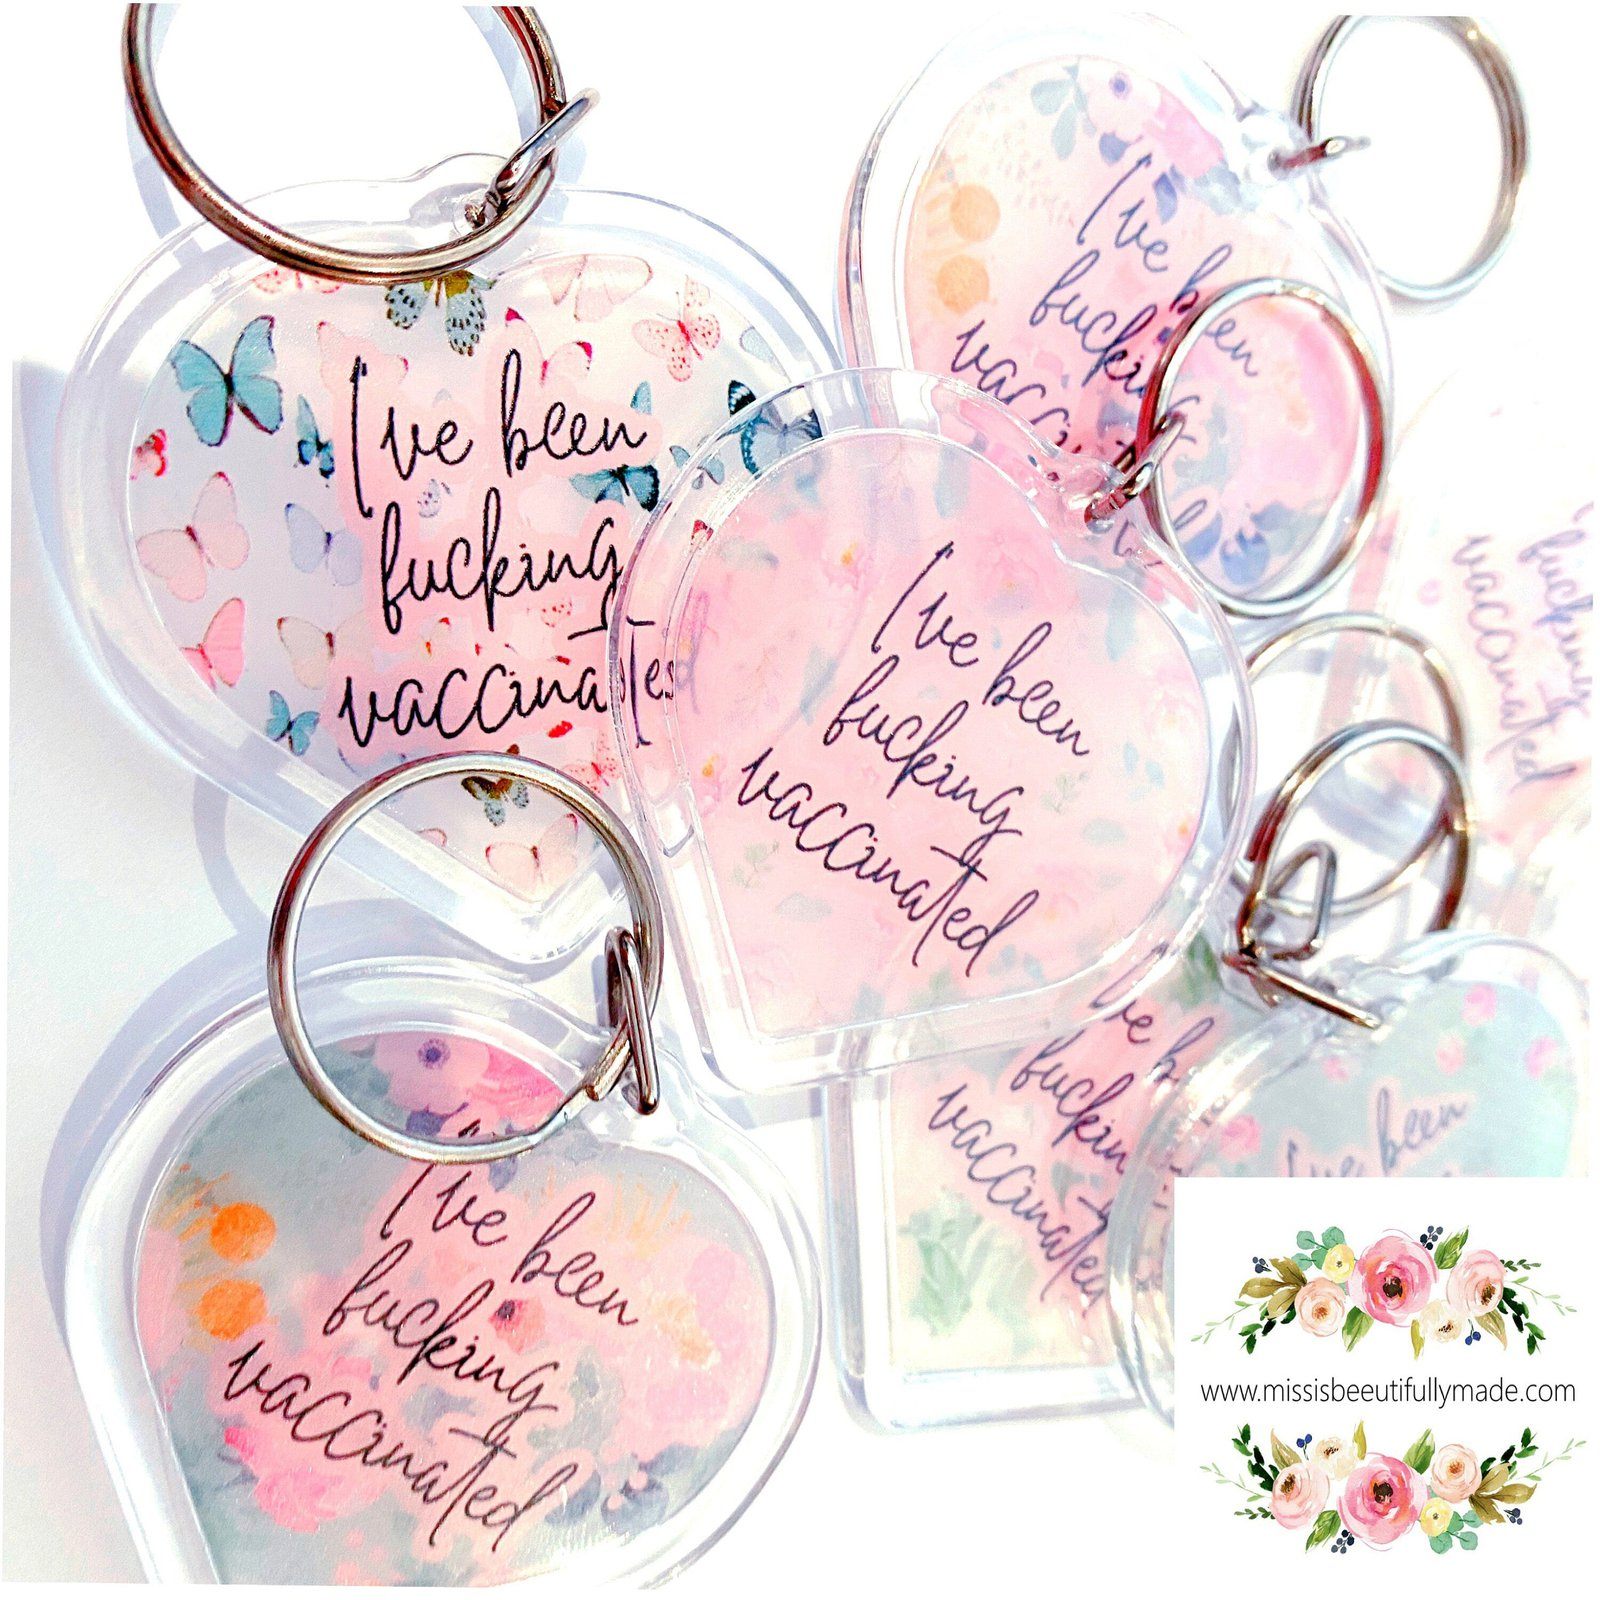 Heart keyring - I’ve been fucking vaccinated